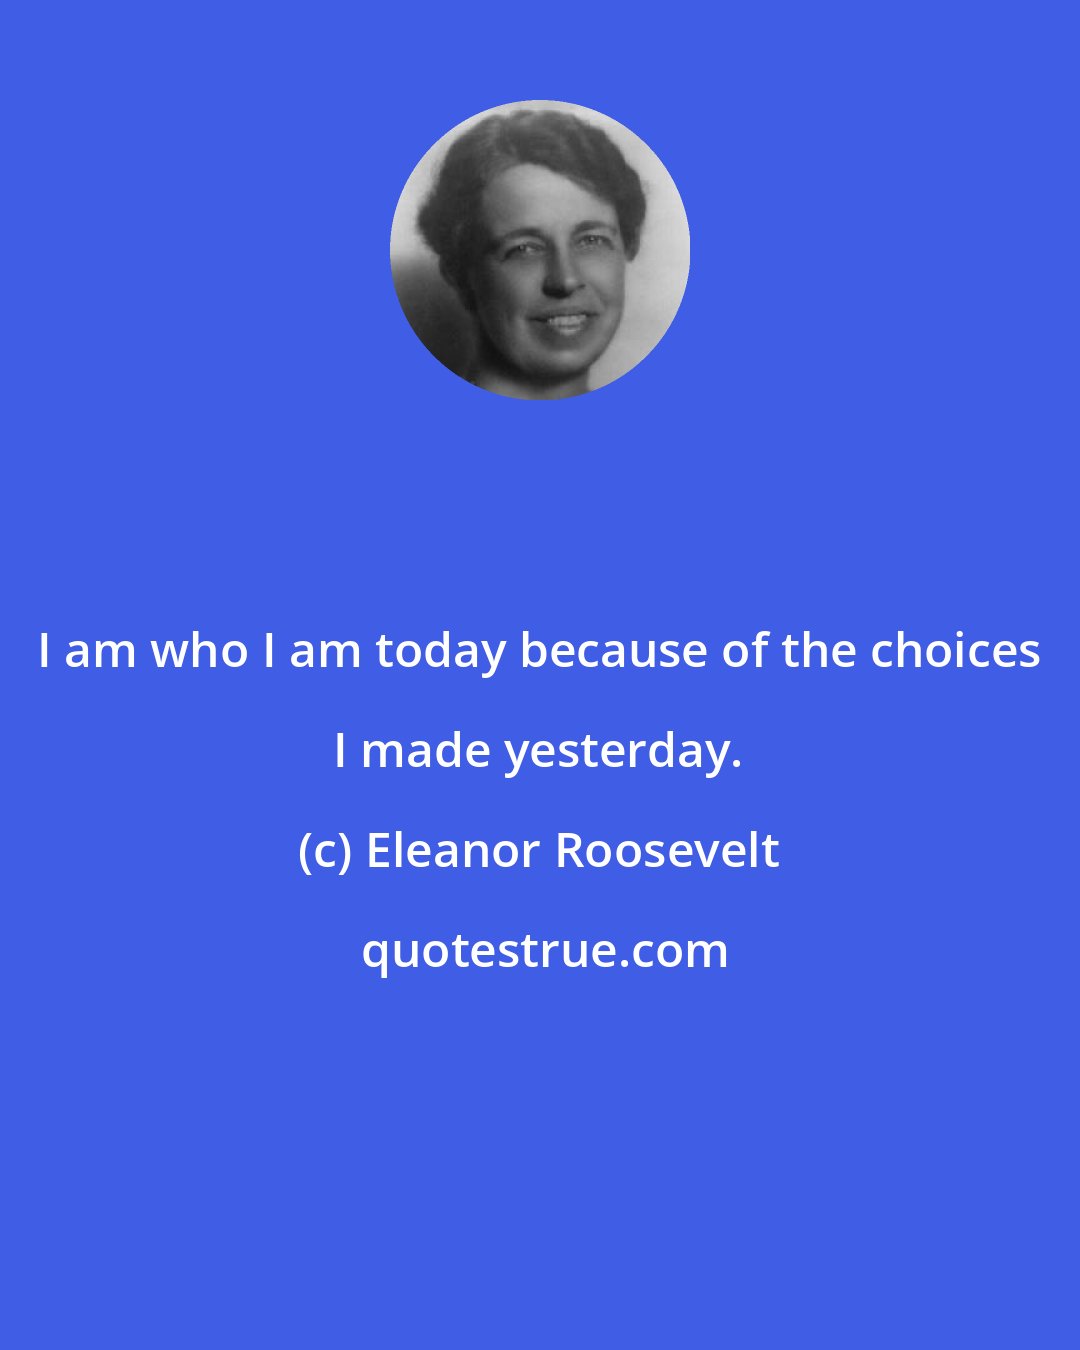 Eleanor Roosevelt: I am who I am today because of the choices I made yesterday.